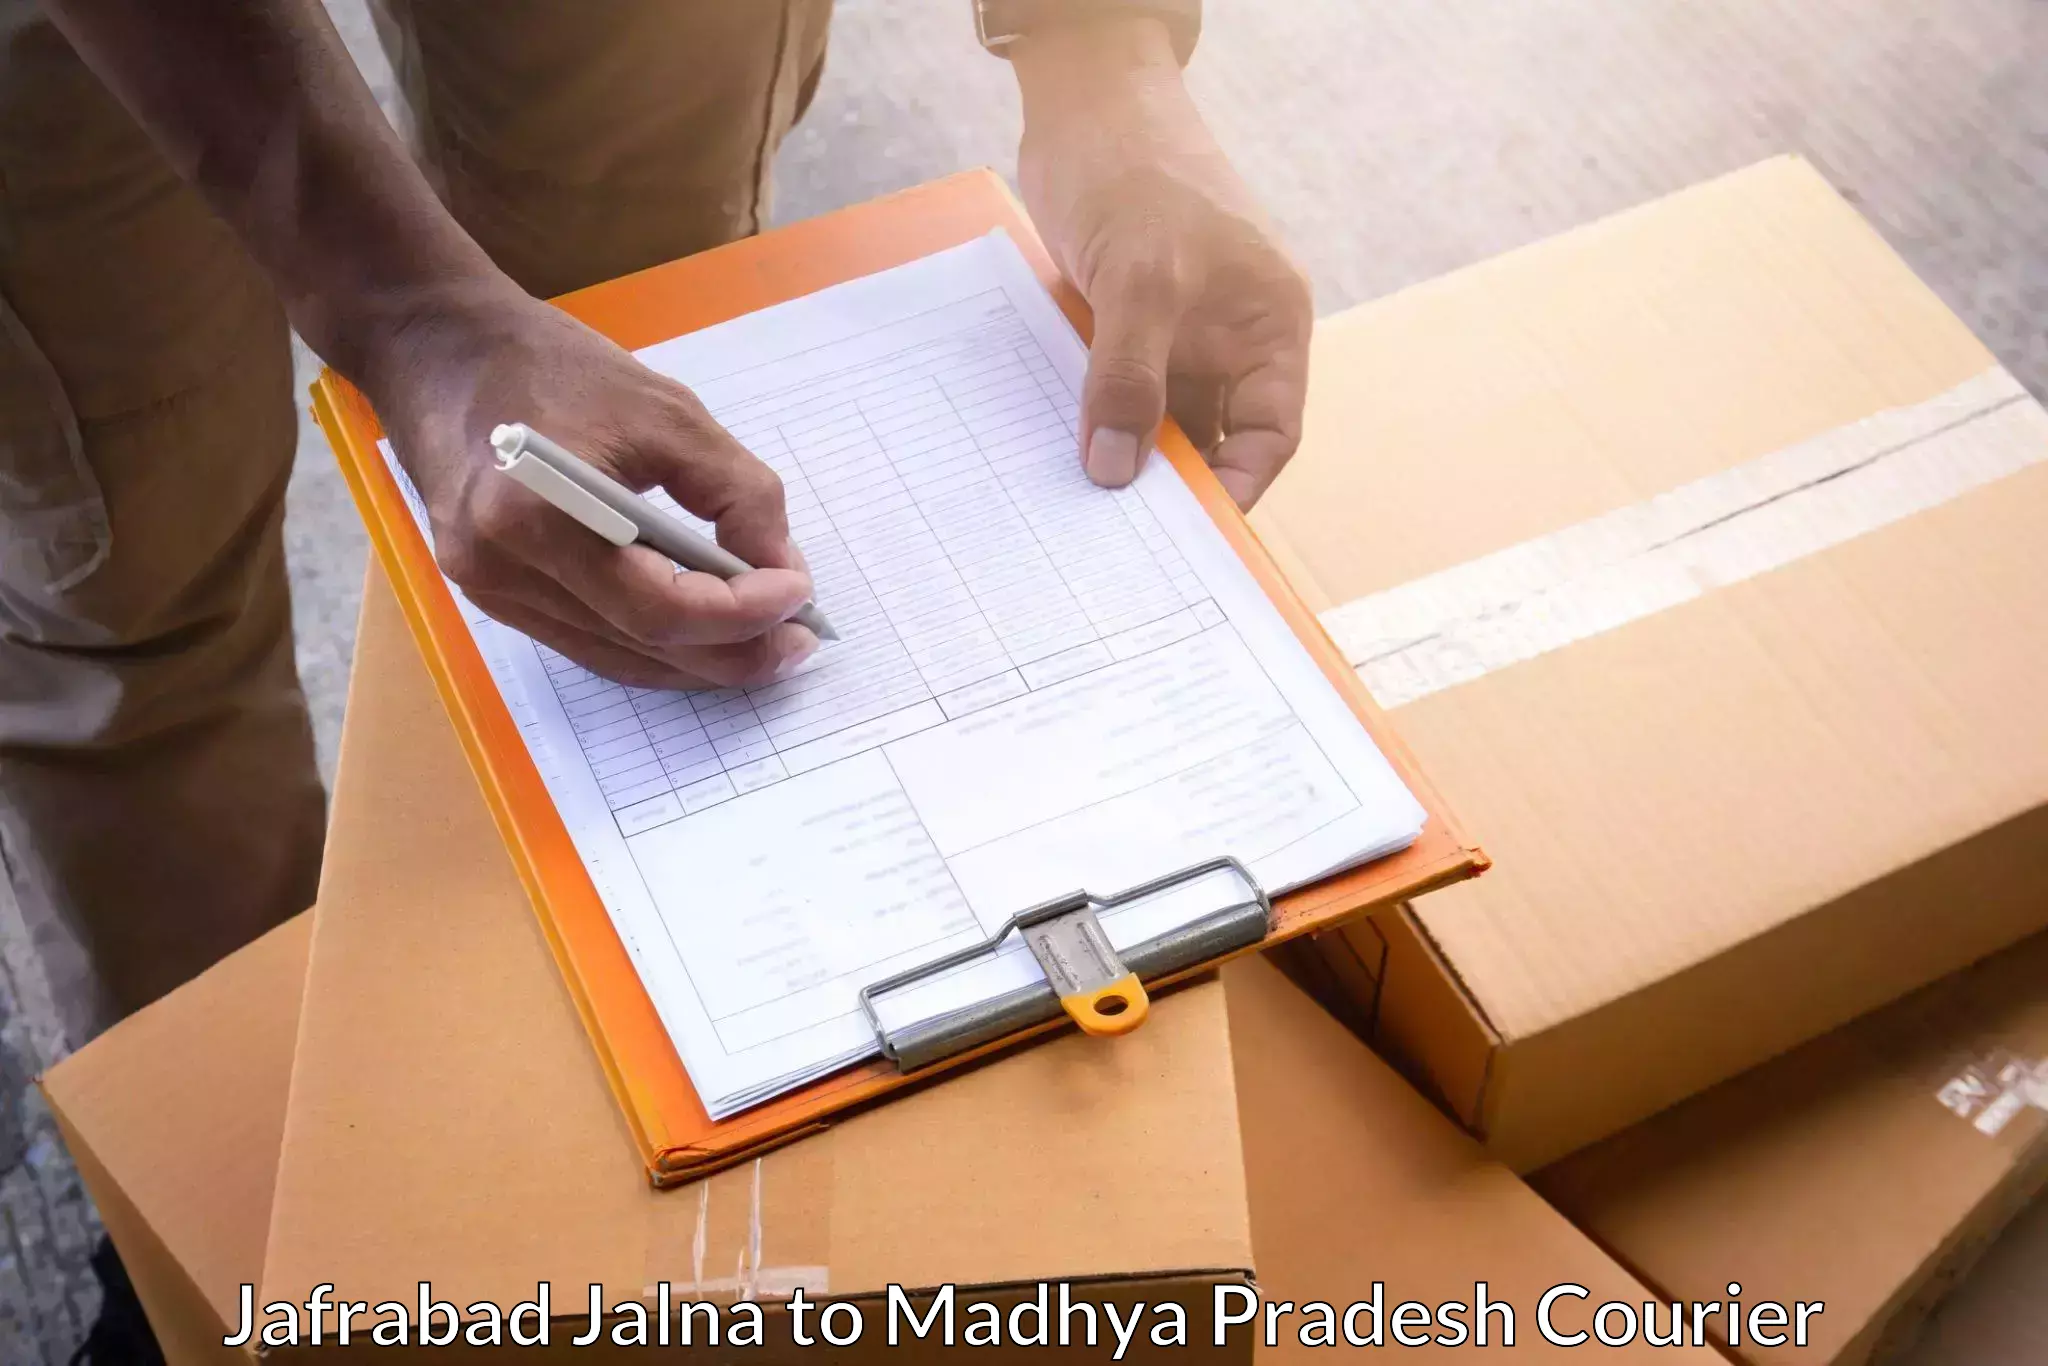 On-call courier service Jafrabad Jalna to IIIT Bhopal